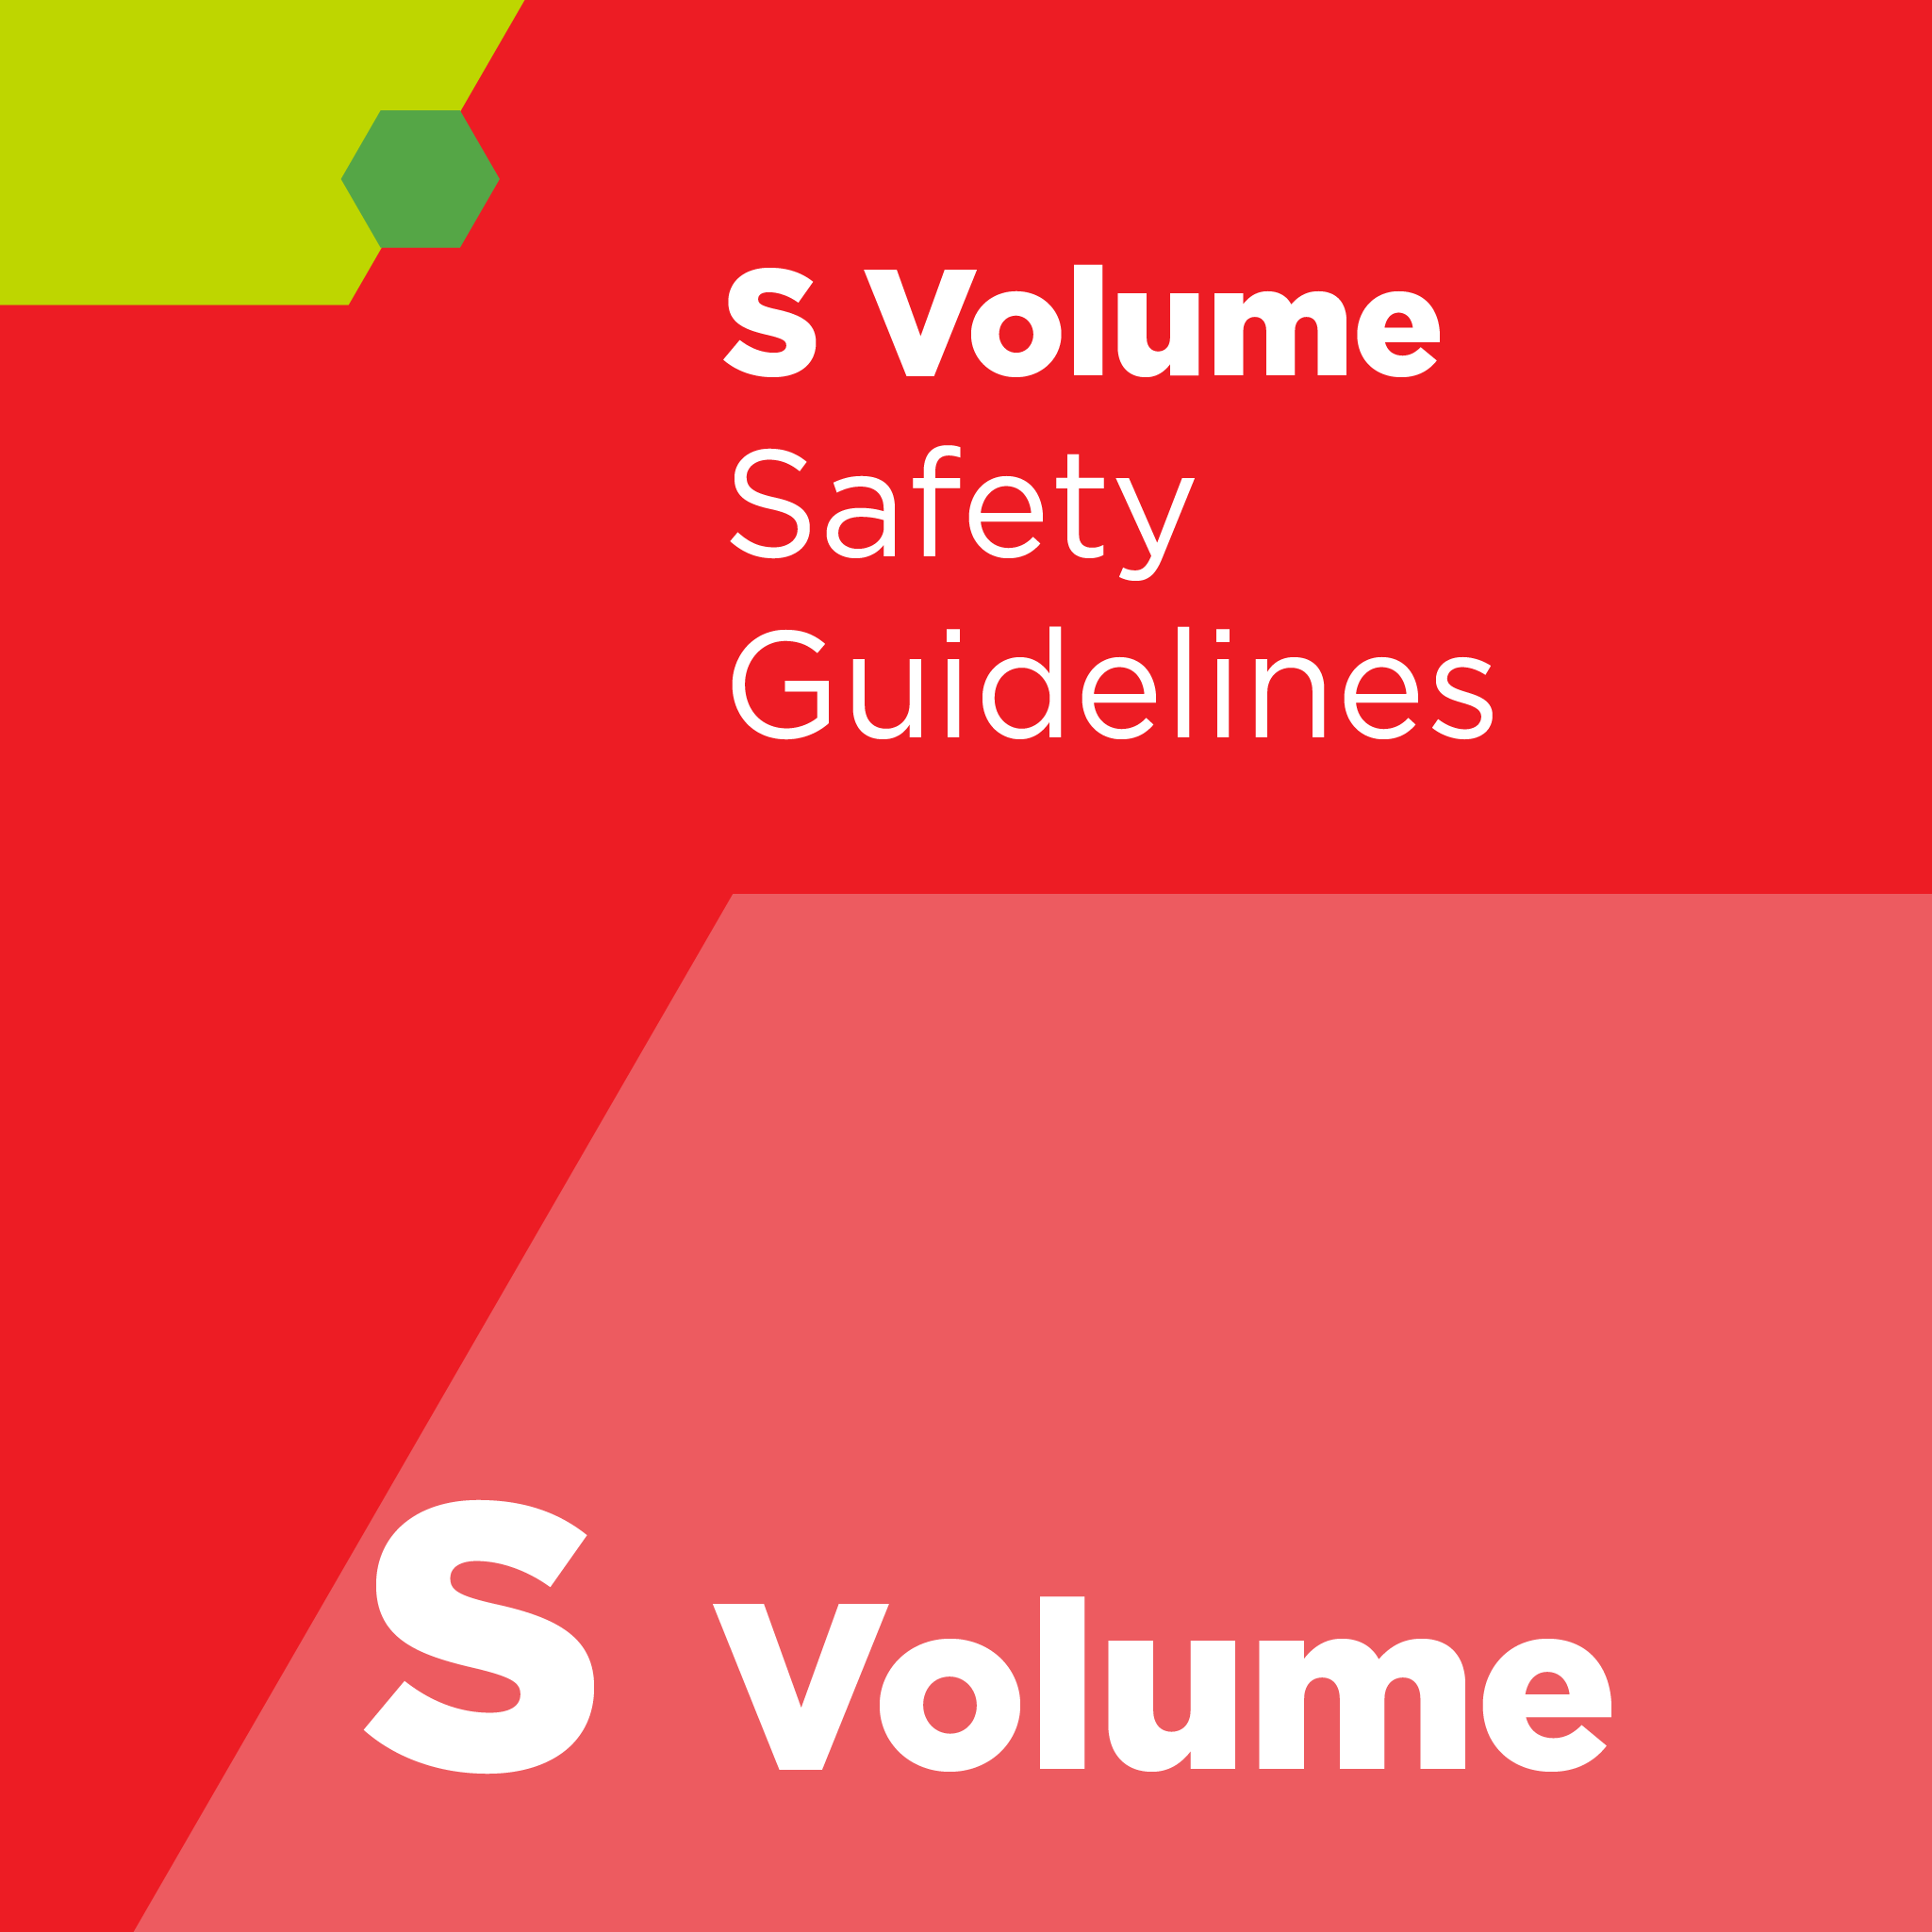 S02600 - SEMI S26 - Environmental, Health, and Safety Guideline for FPD Manufacturing System